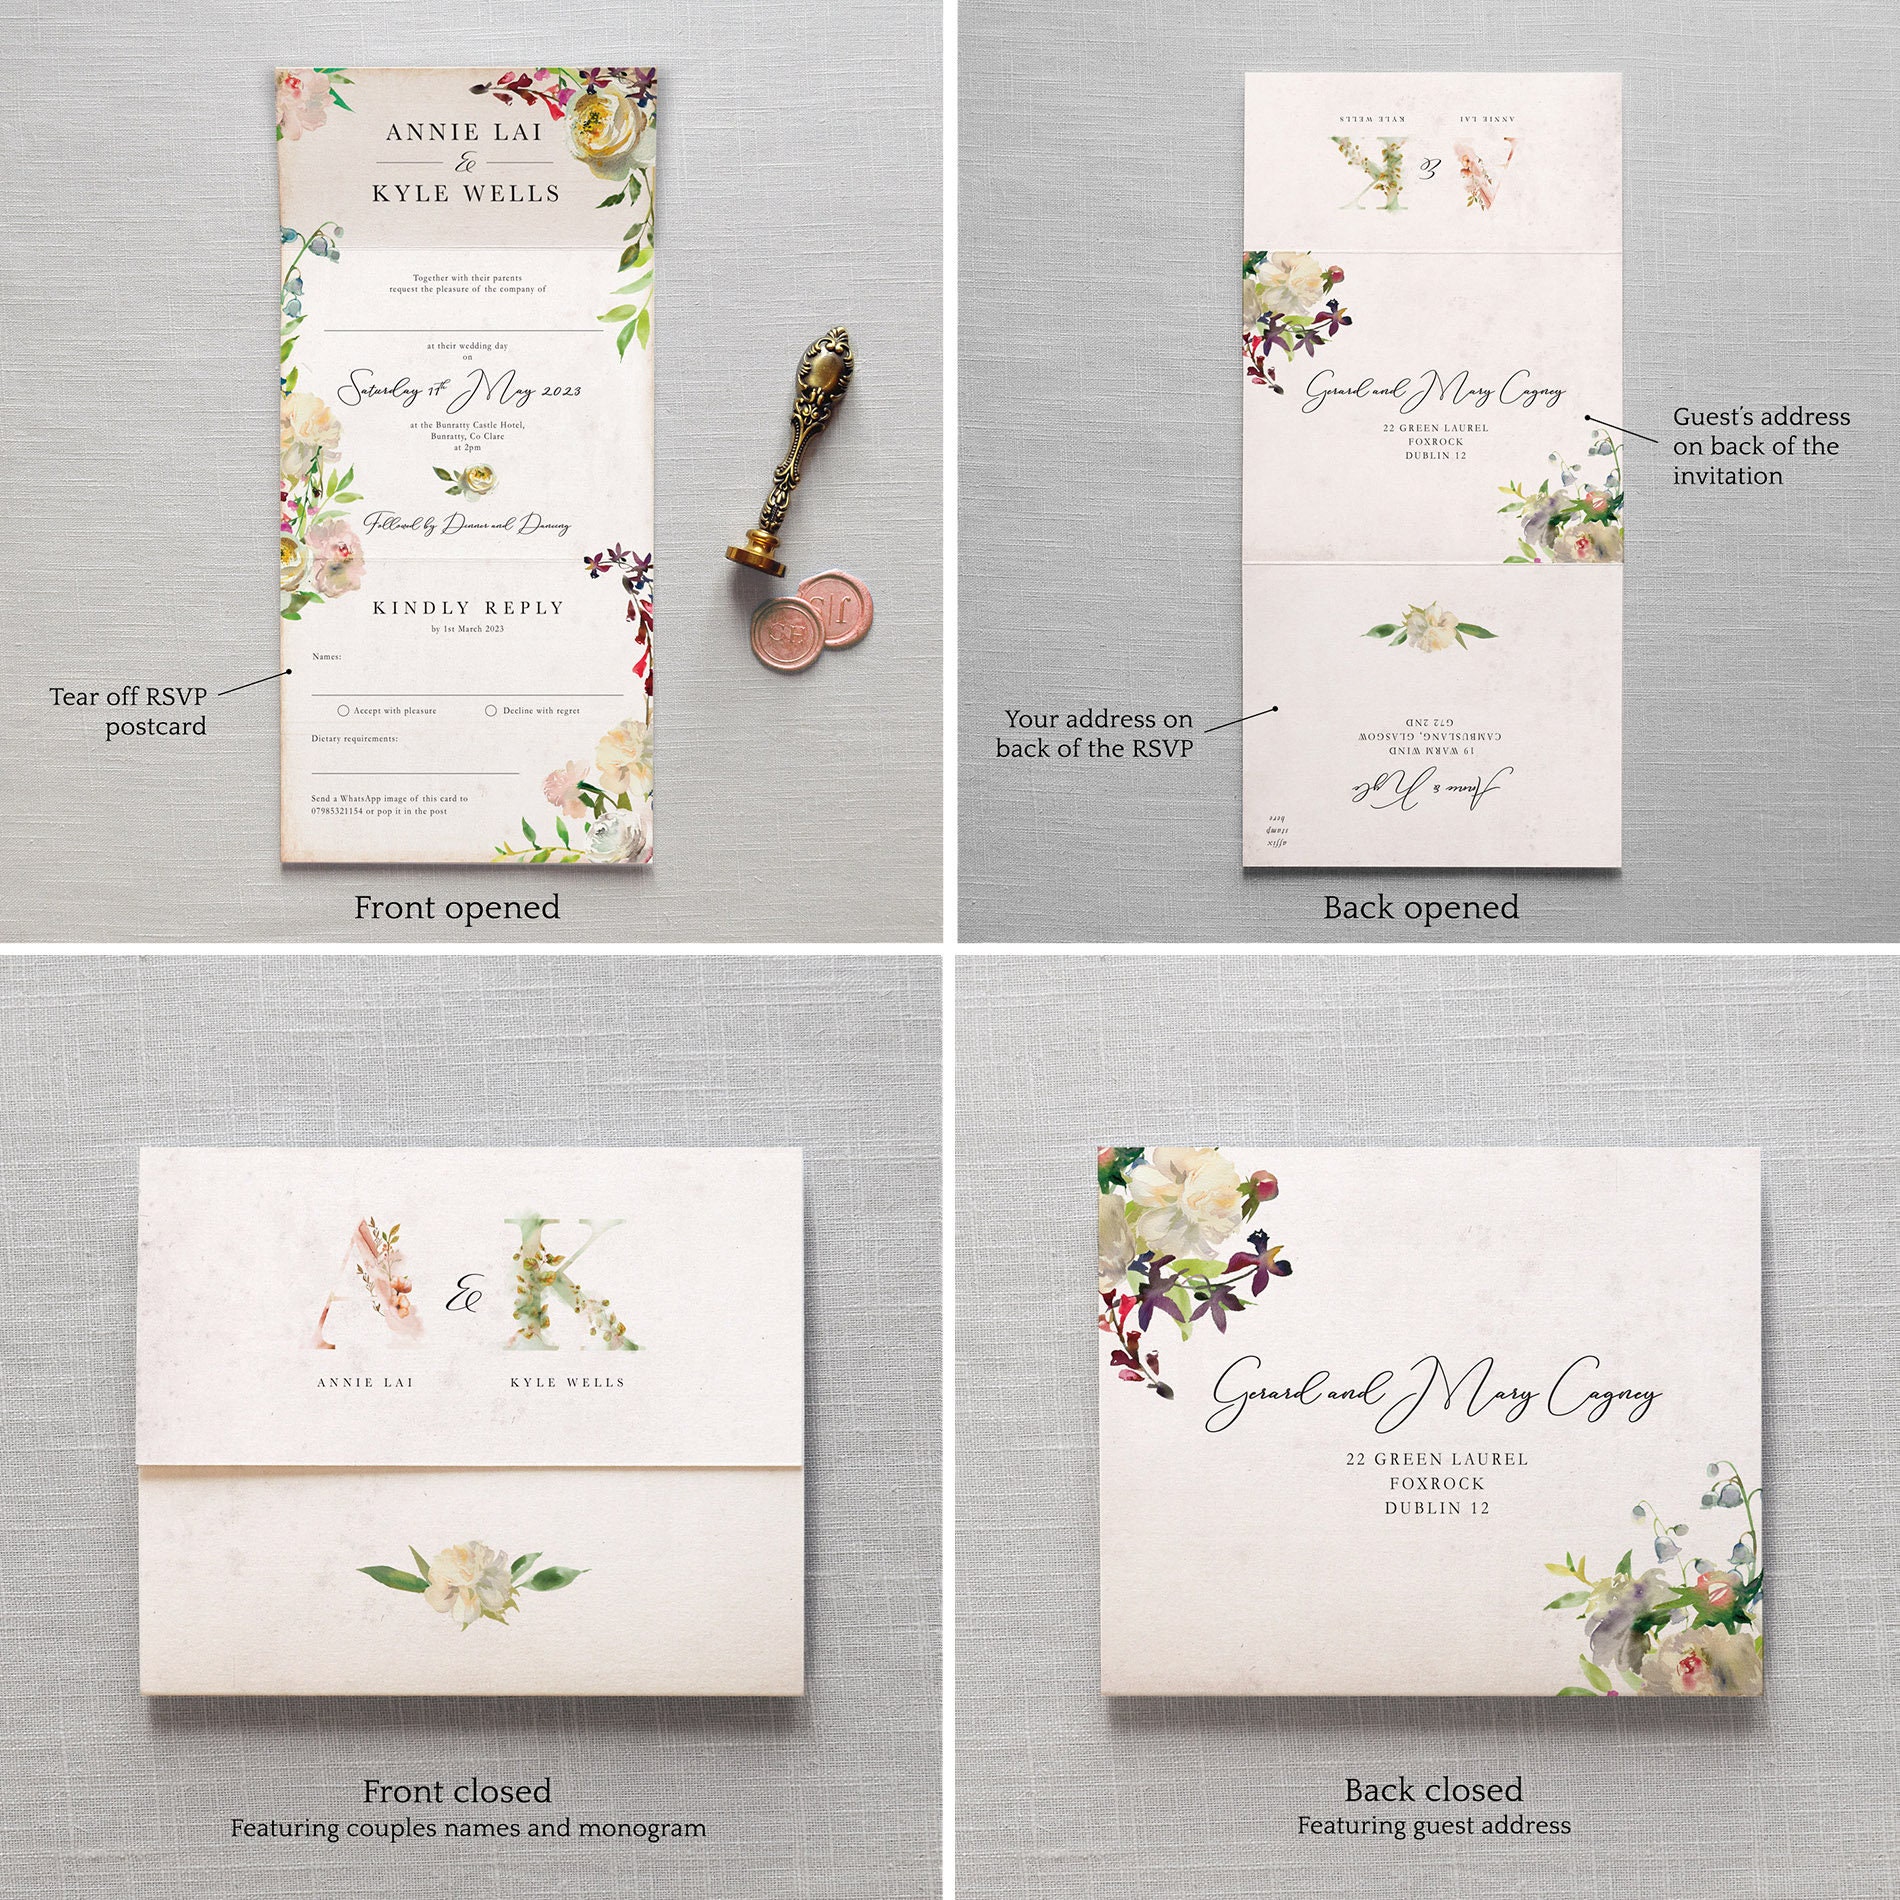 Spring Wildflowers Wedding Invitations by Mere Paper